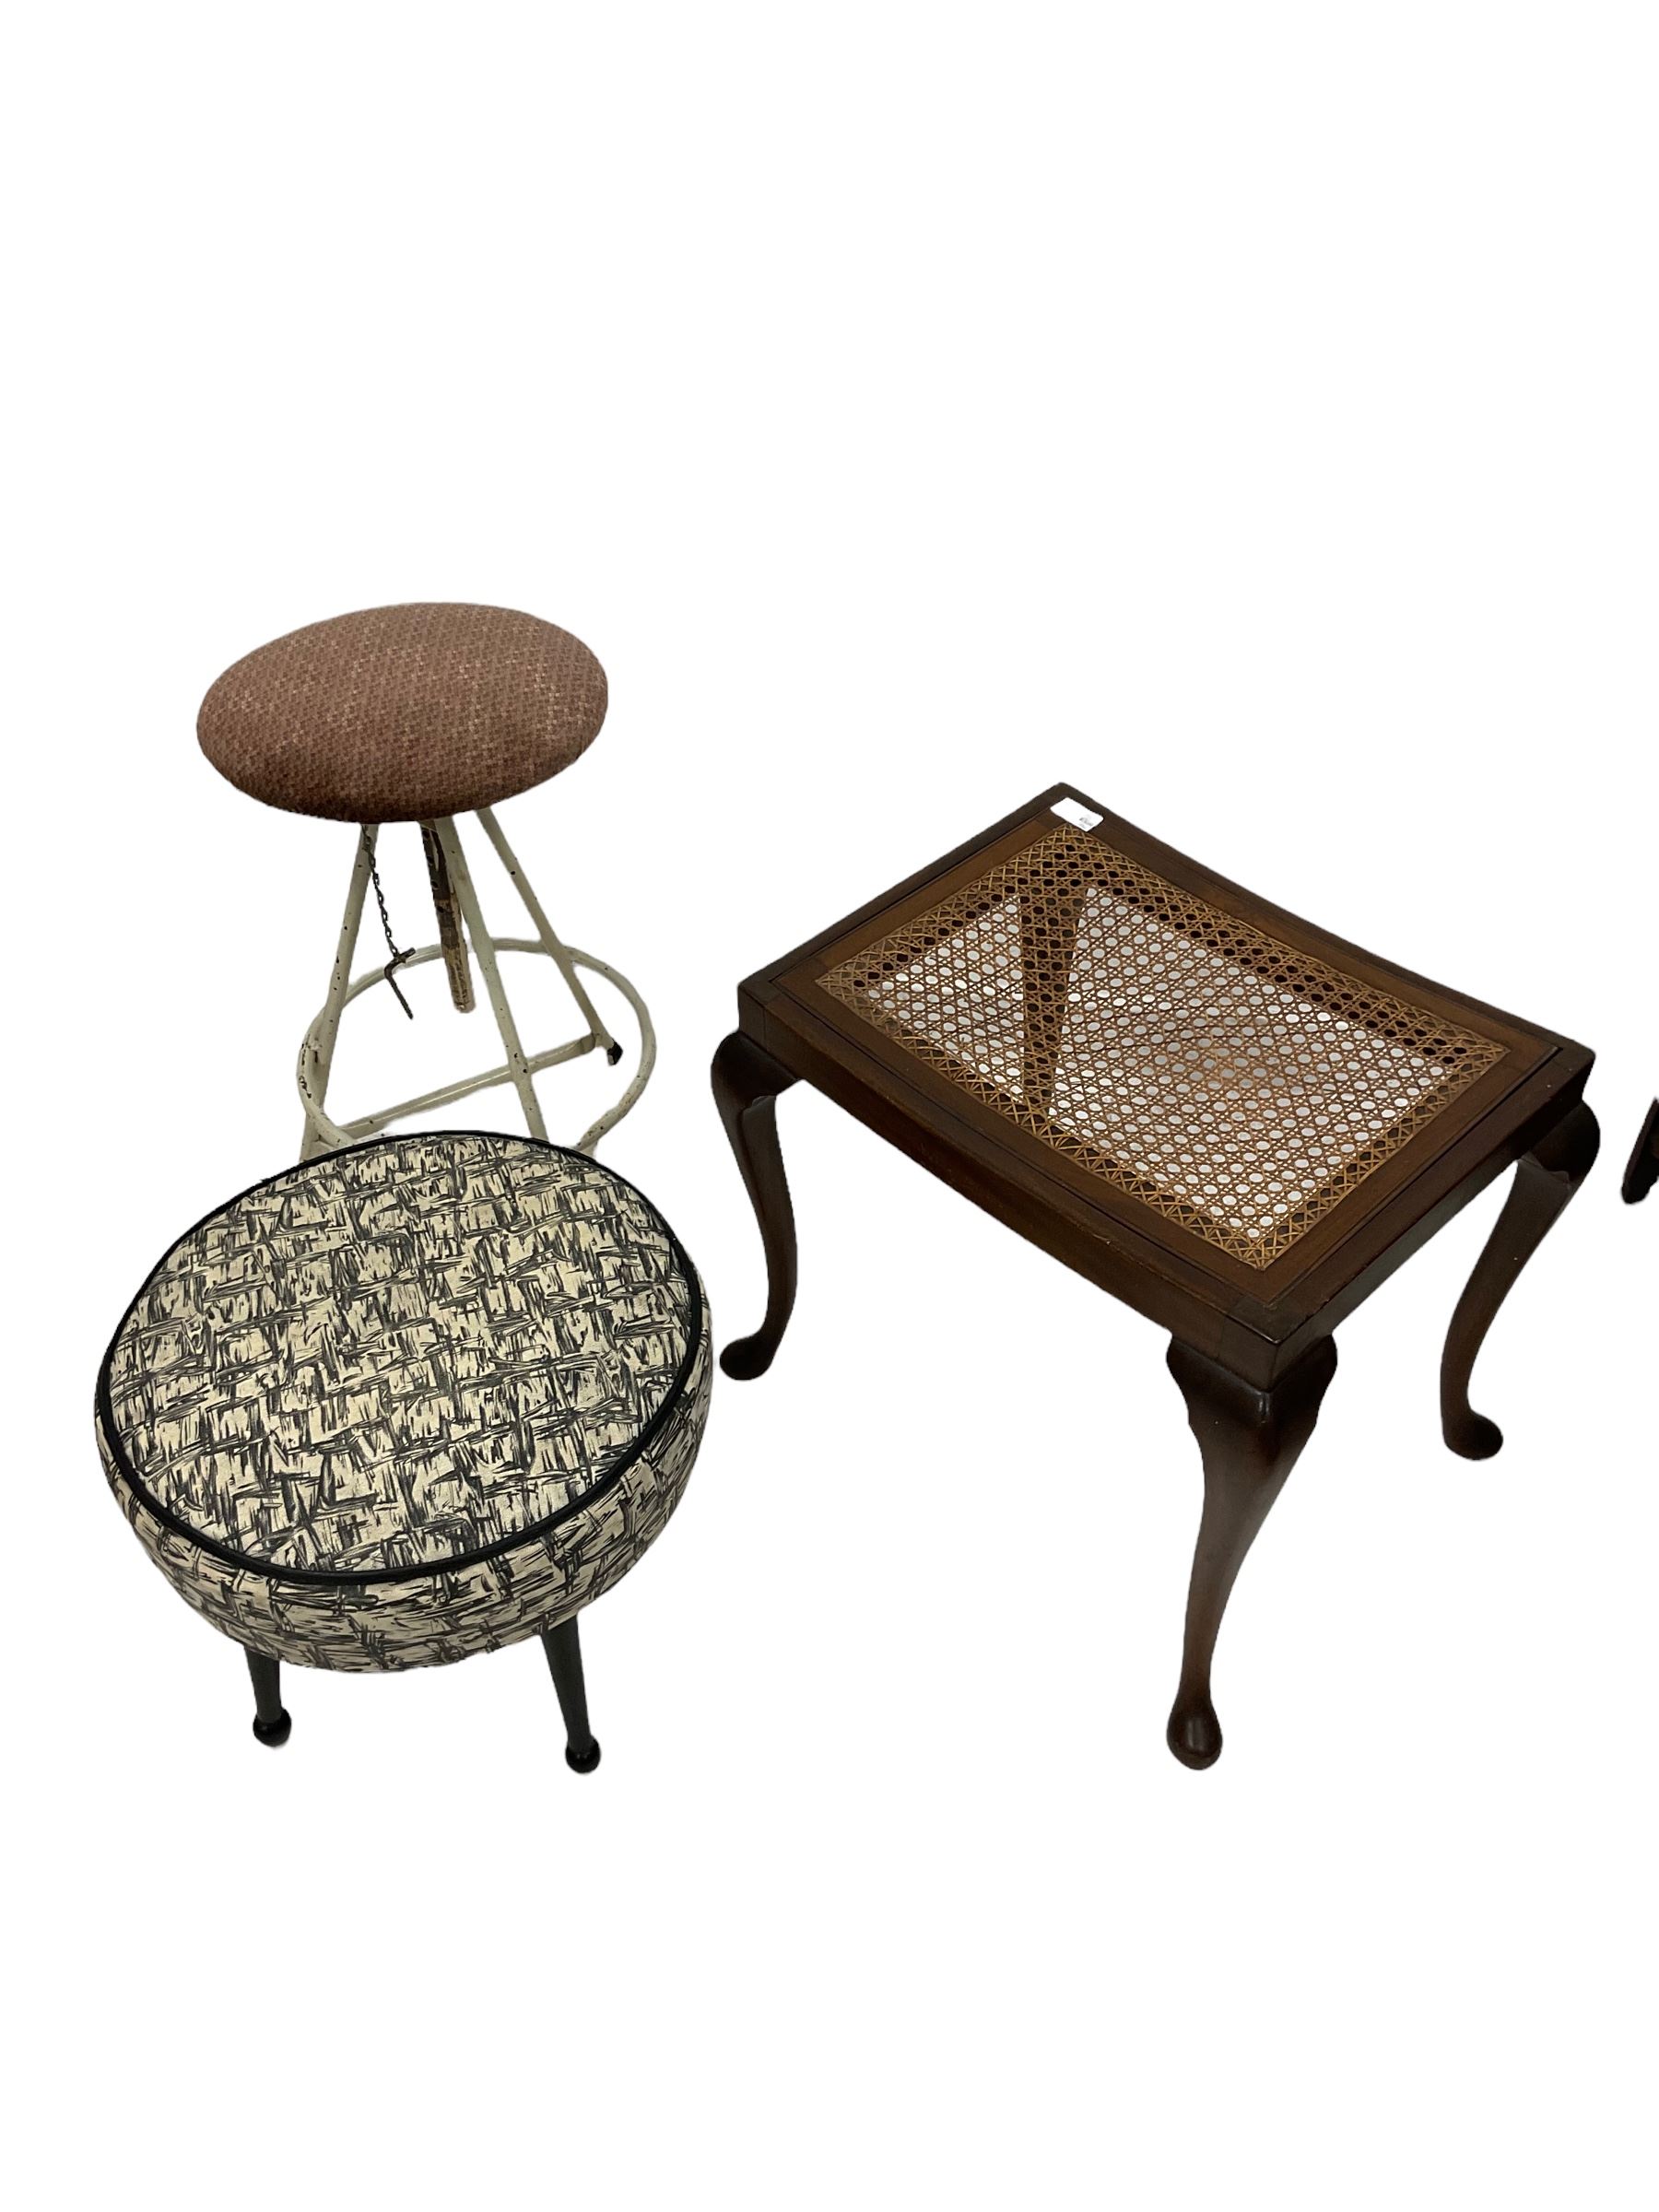 Three stools in various sizes and styles